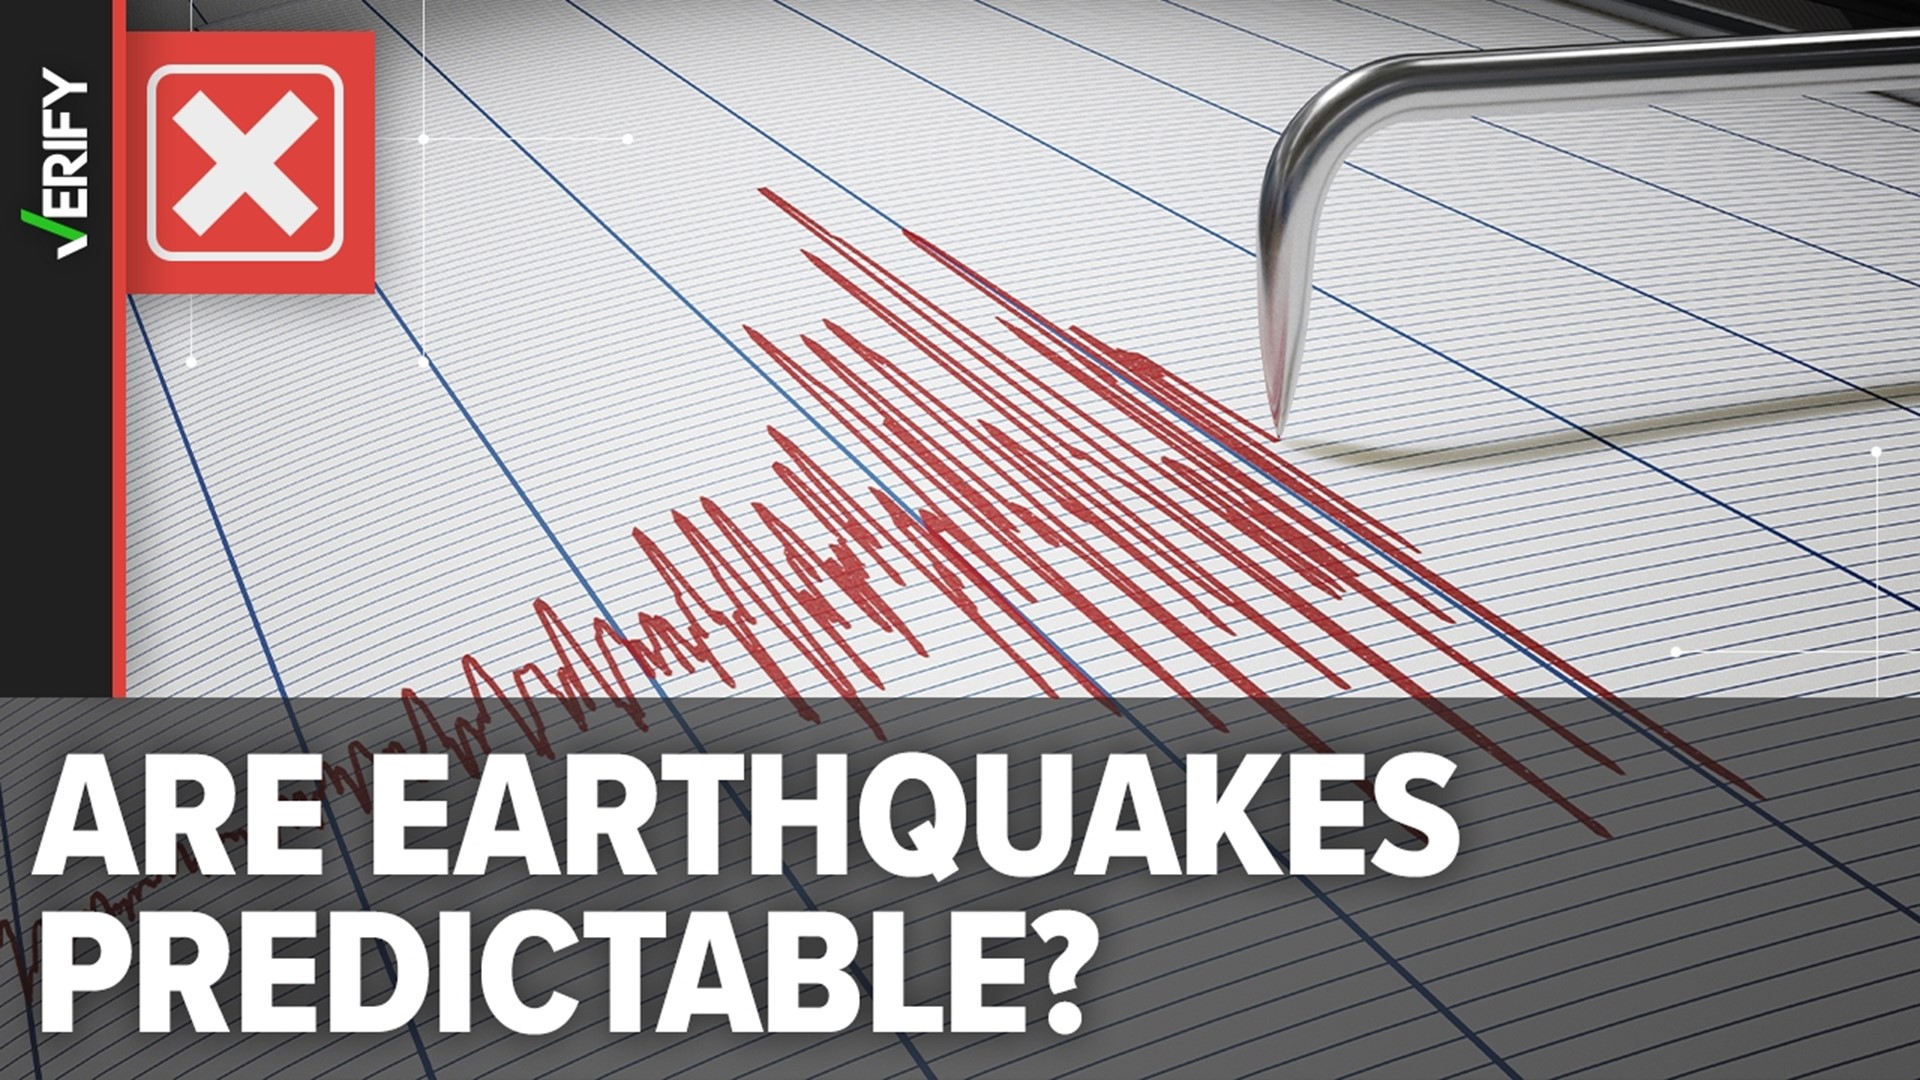 It’s impossible to make earthquake predictions, like people on social media claim, but scientists can estimate the probability of one hitting a certain area in the f